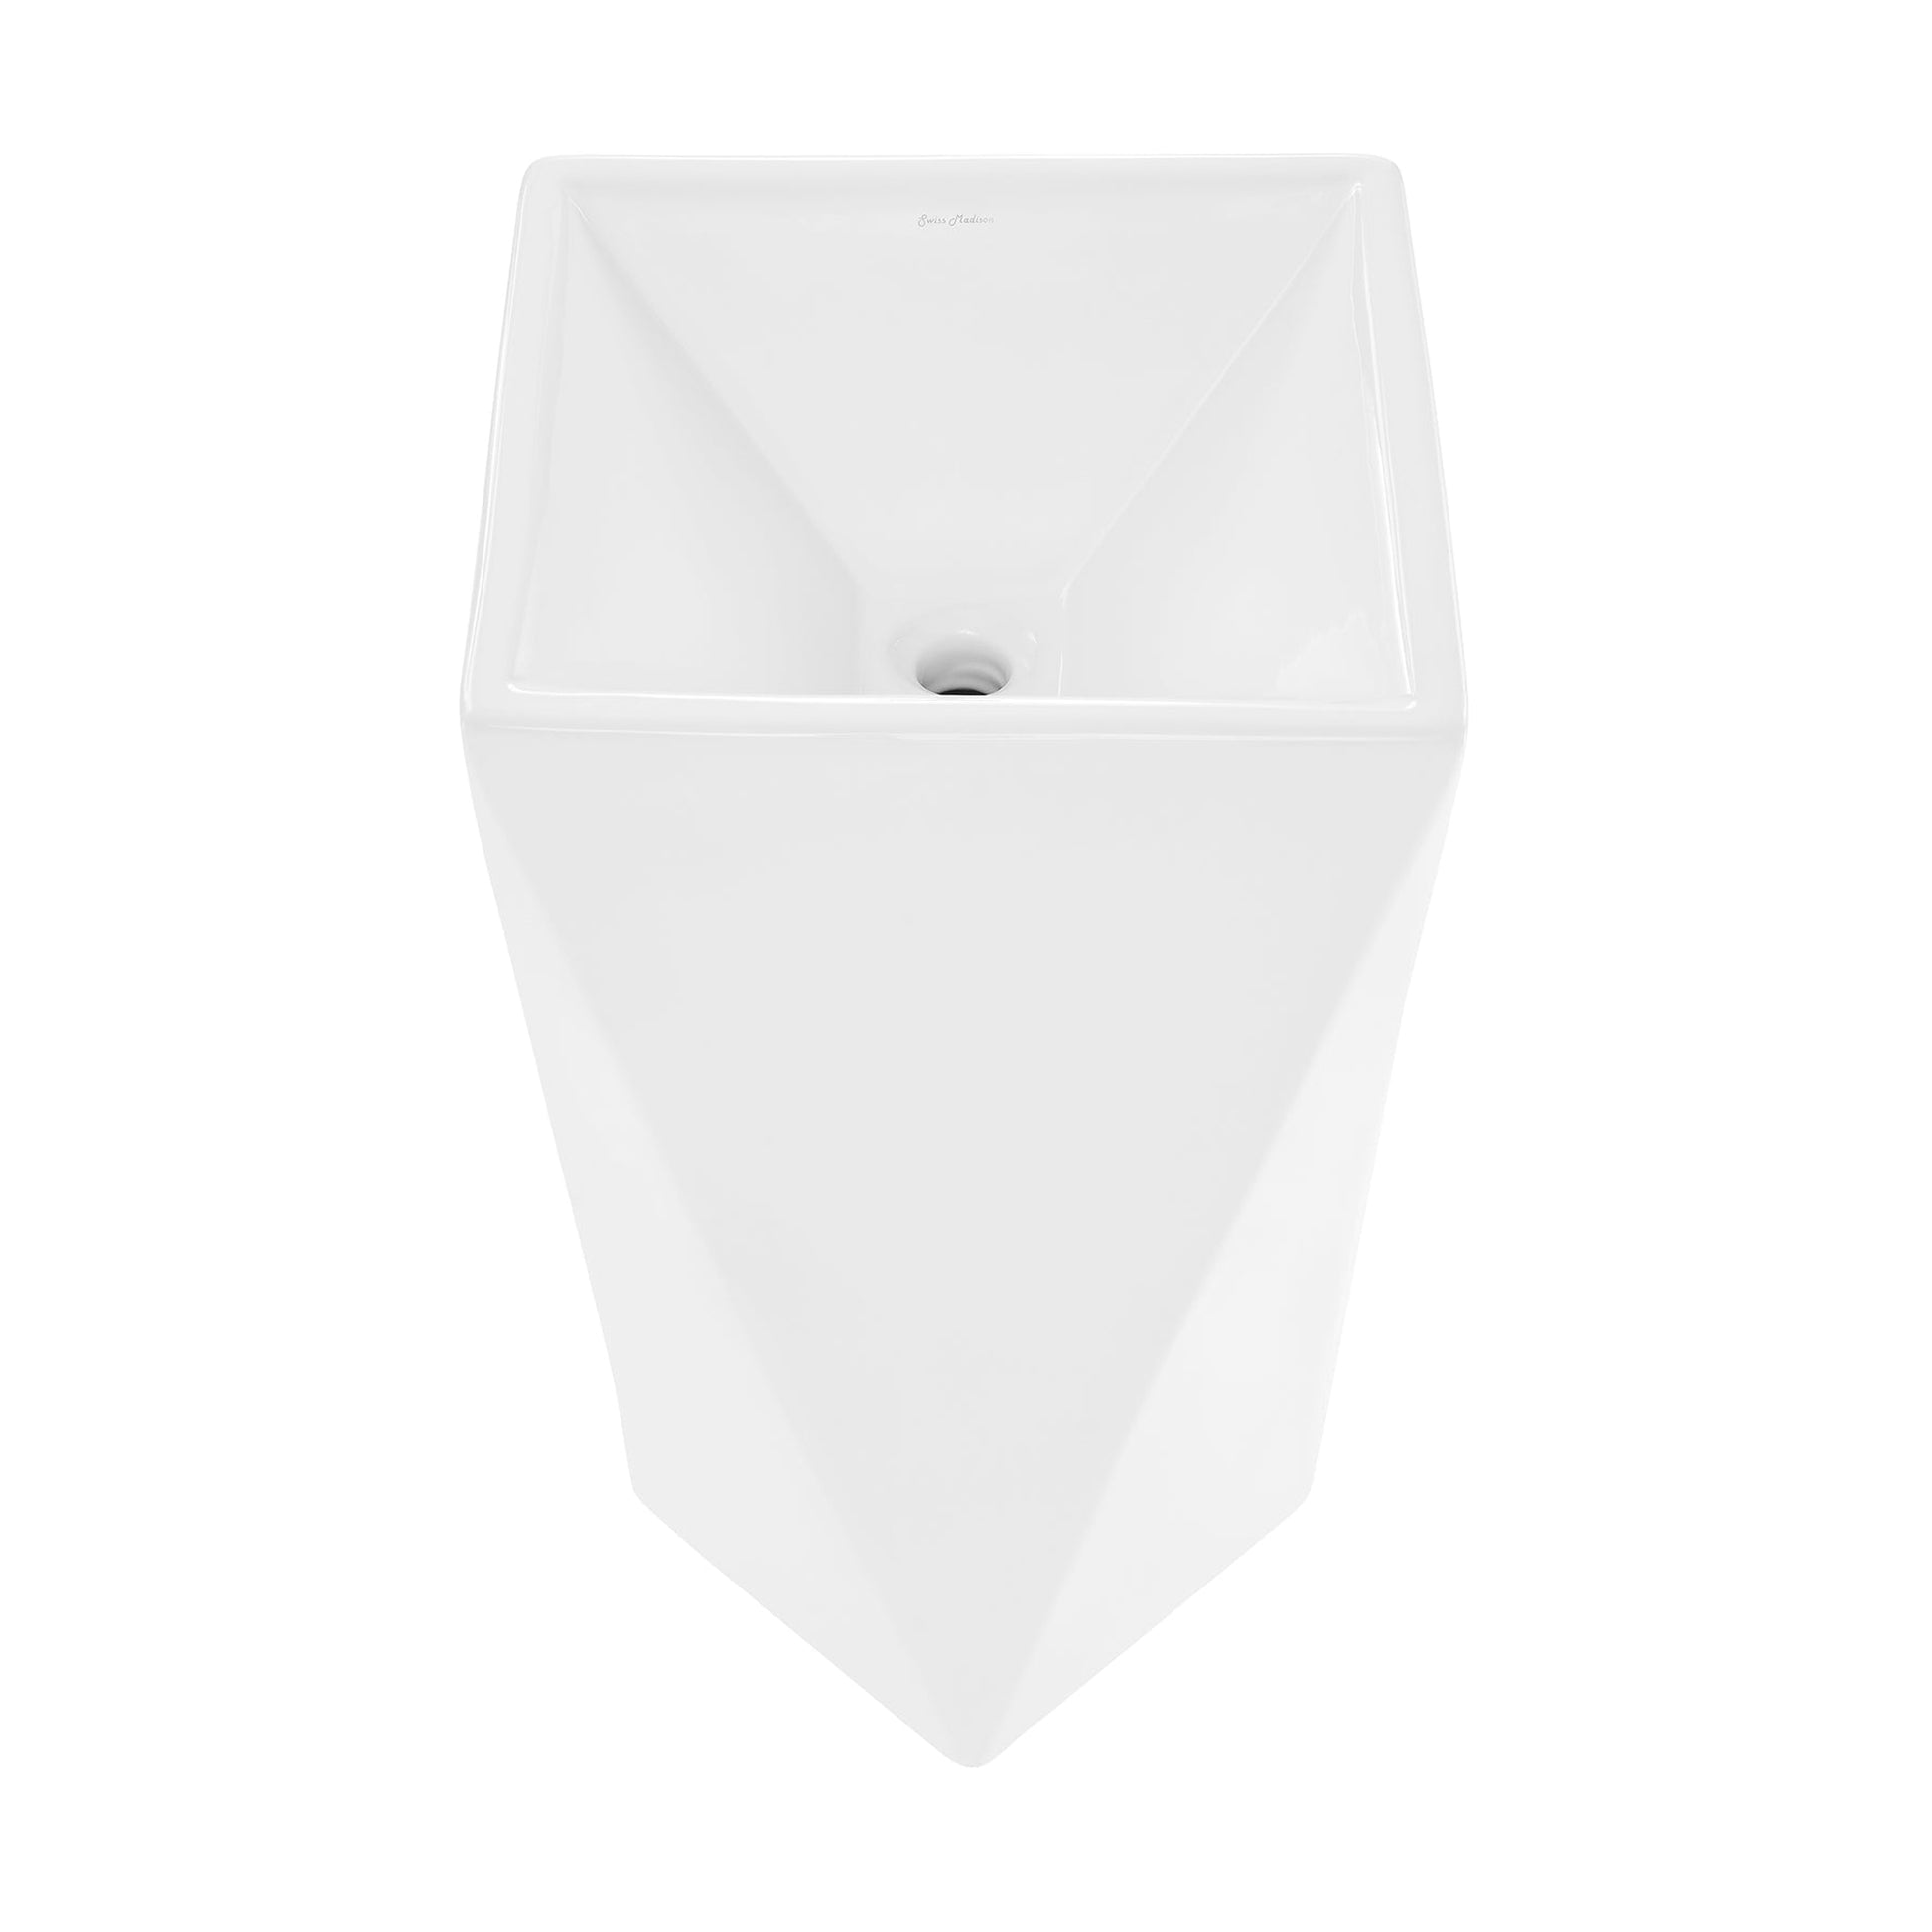 Swiss Madison Brusque 19" x 33" Freestanding One-Piece Squared White Pedestal Sink With Overflow